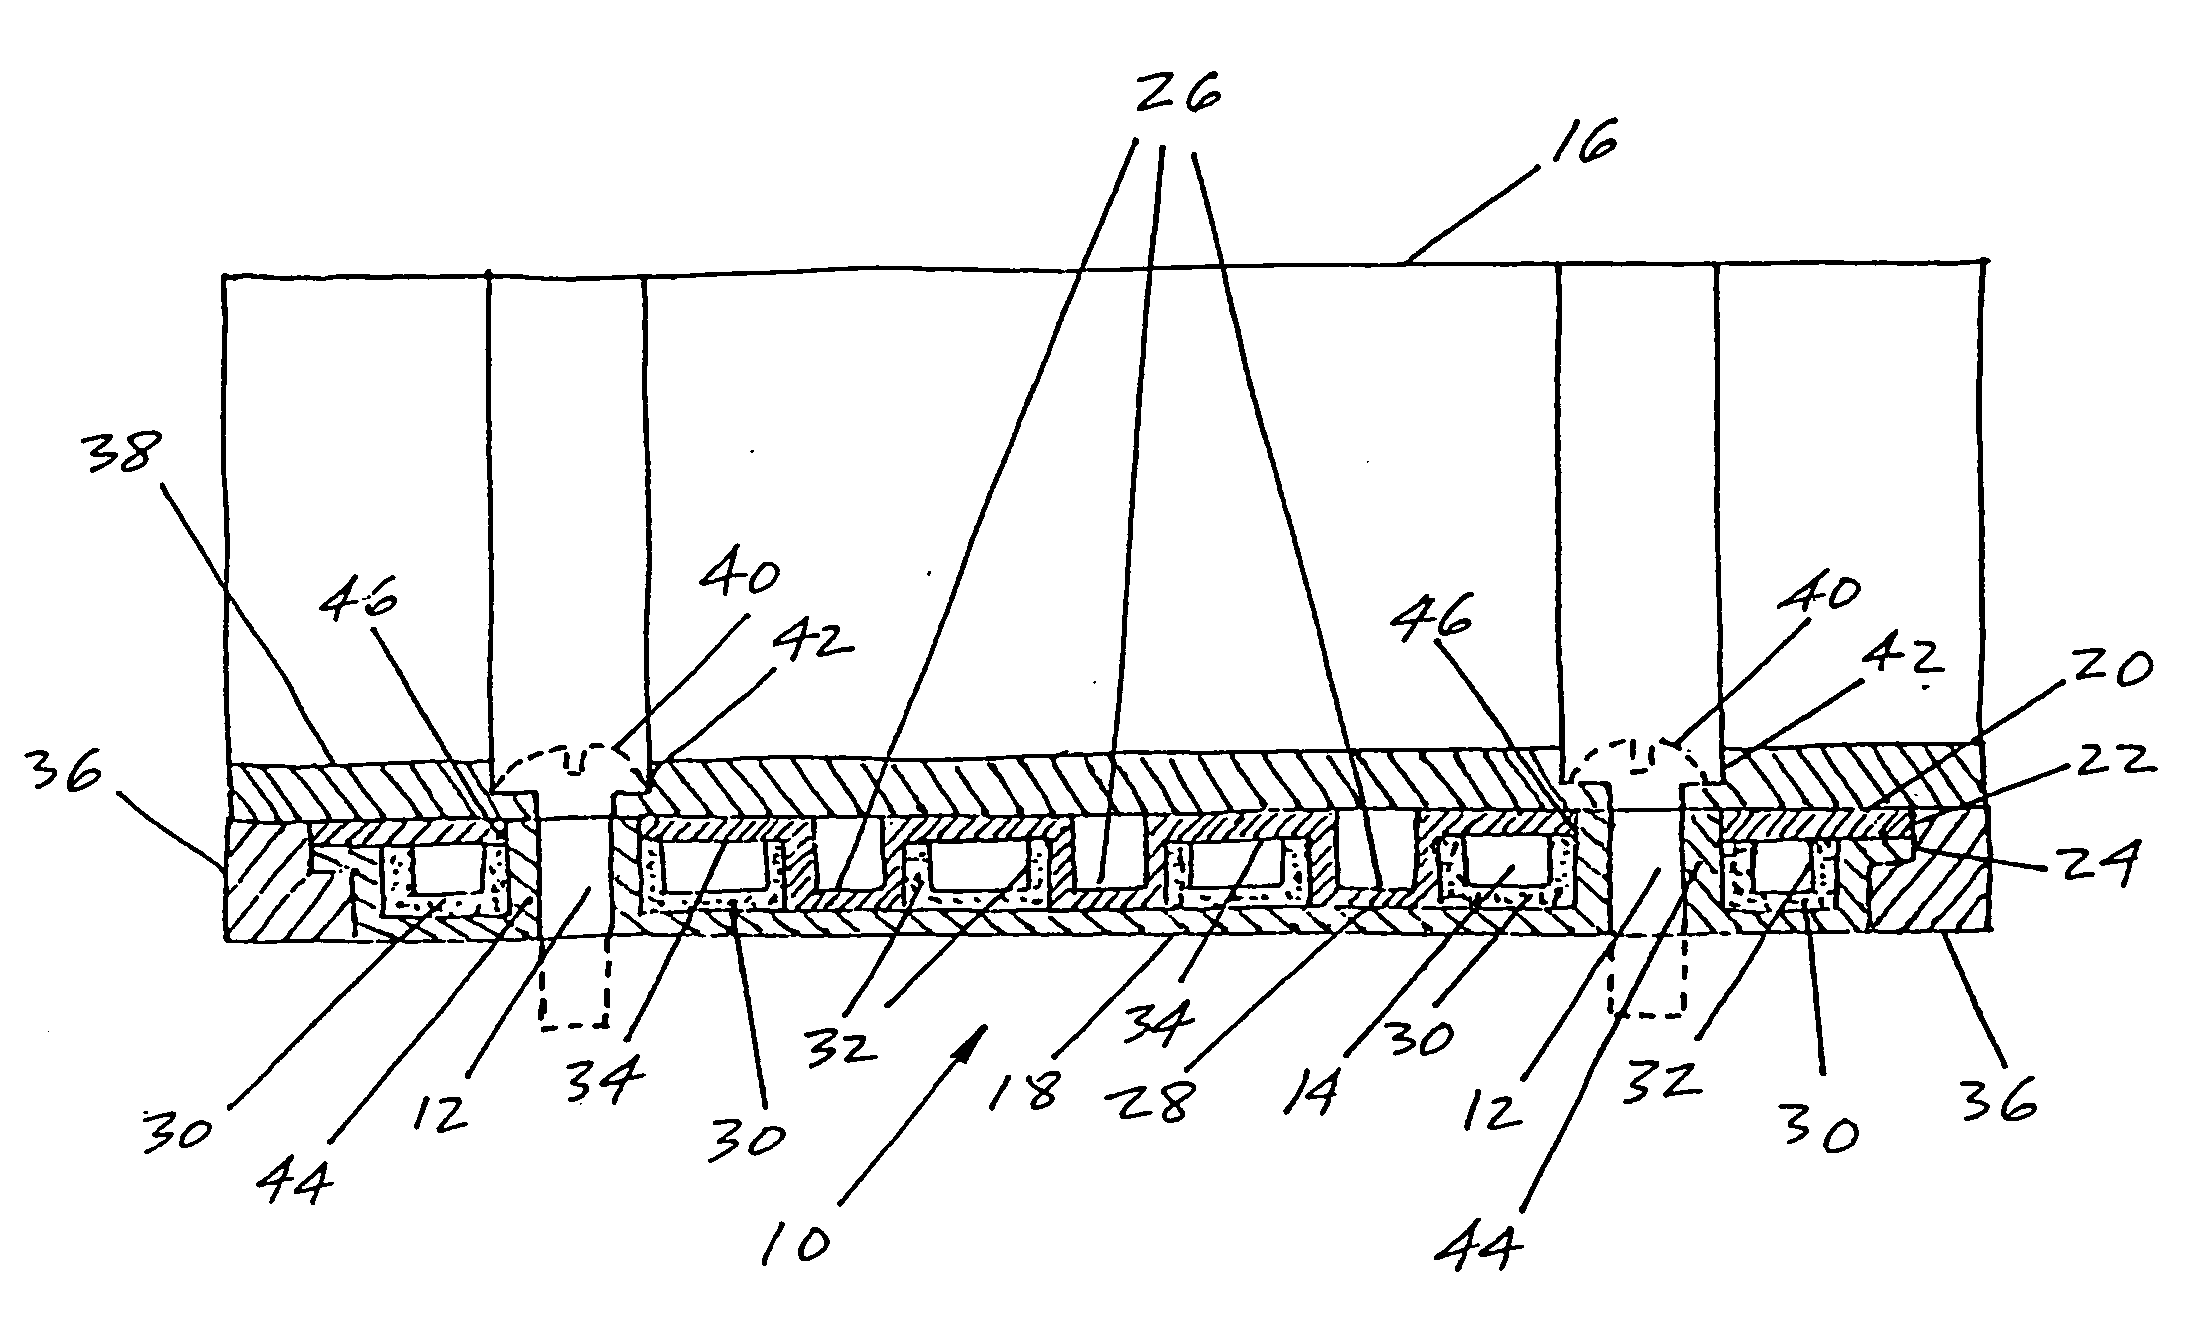 Integrated circuit heat pipe heat spreader with through mounting holes